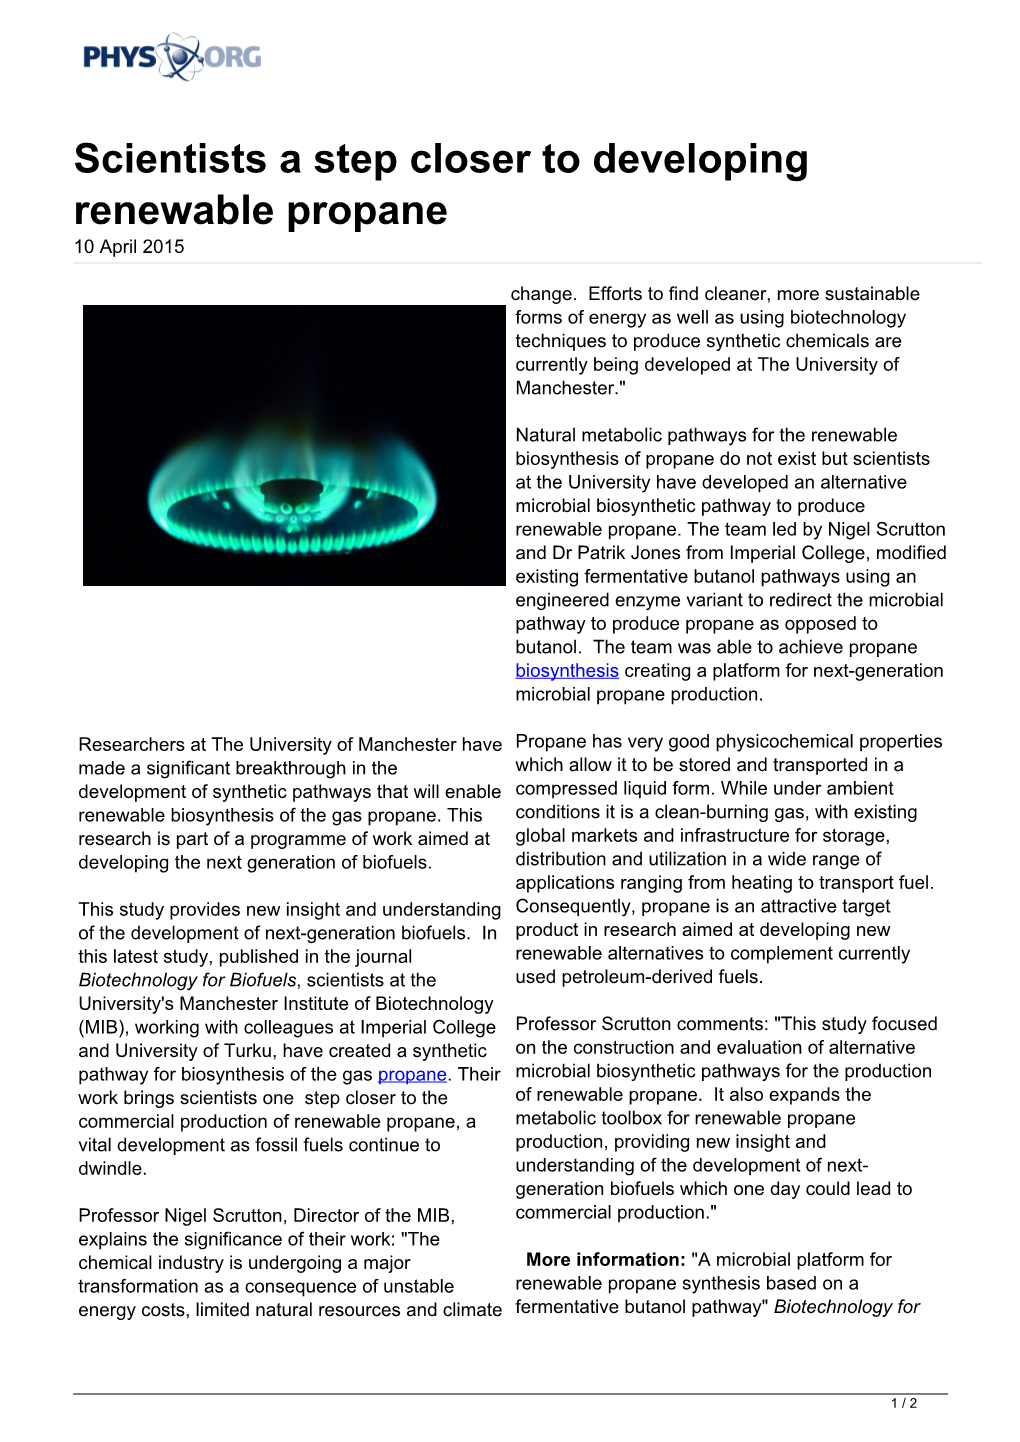 Scientists a Step Closer to Developing Renewable Propane 10 April 2015